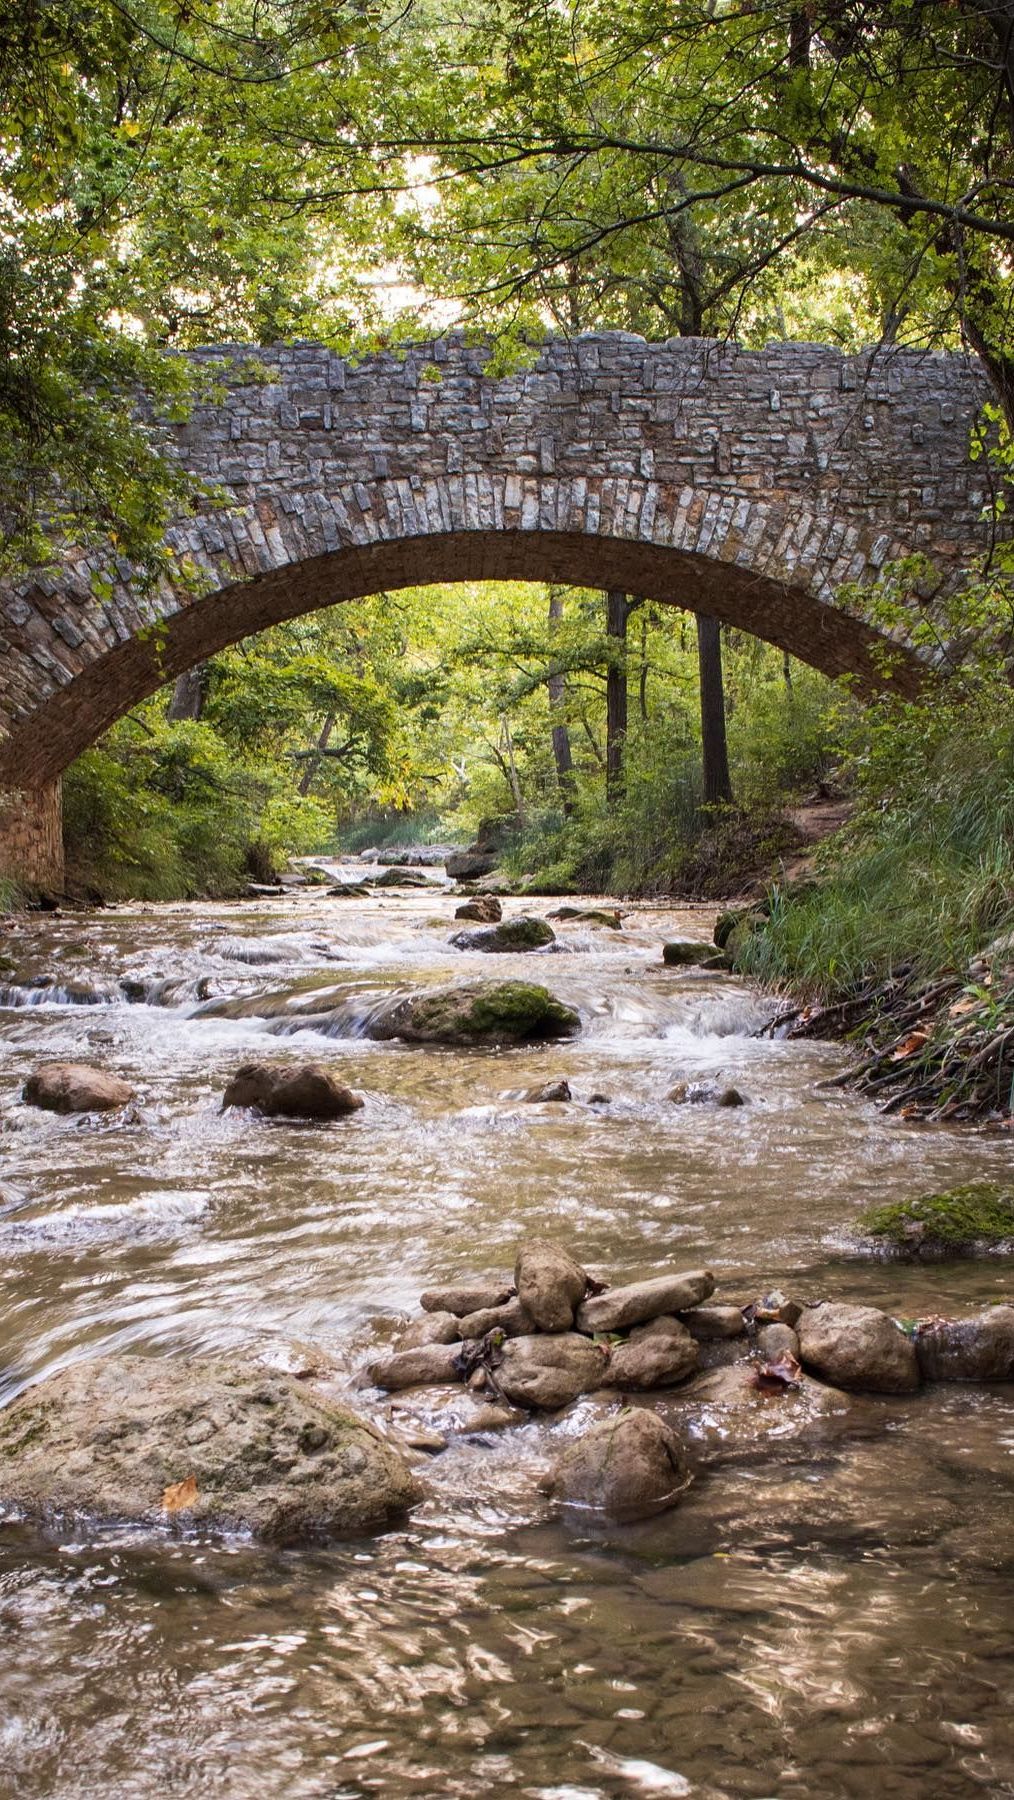 2. Chickasaw National Recreation Area: A Haven of Springs and Calm